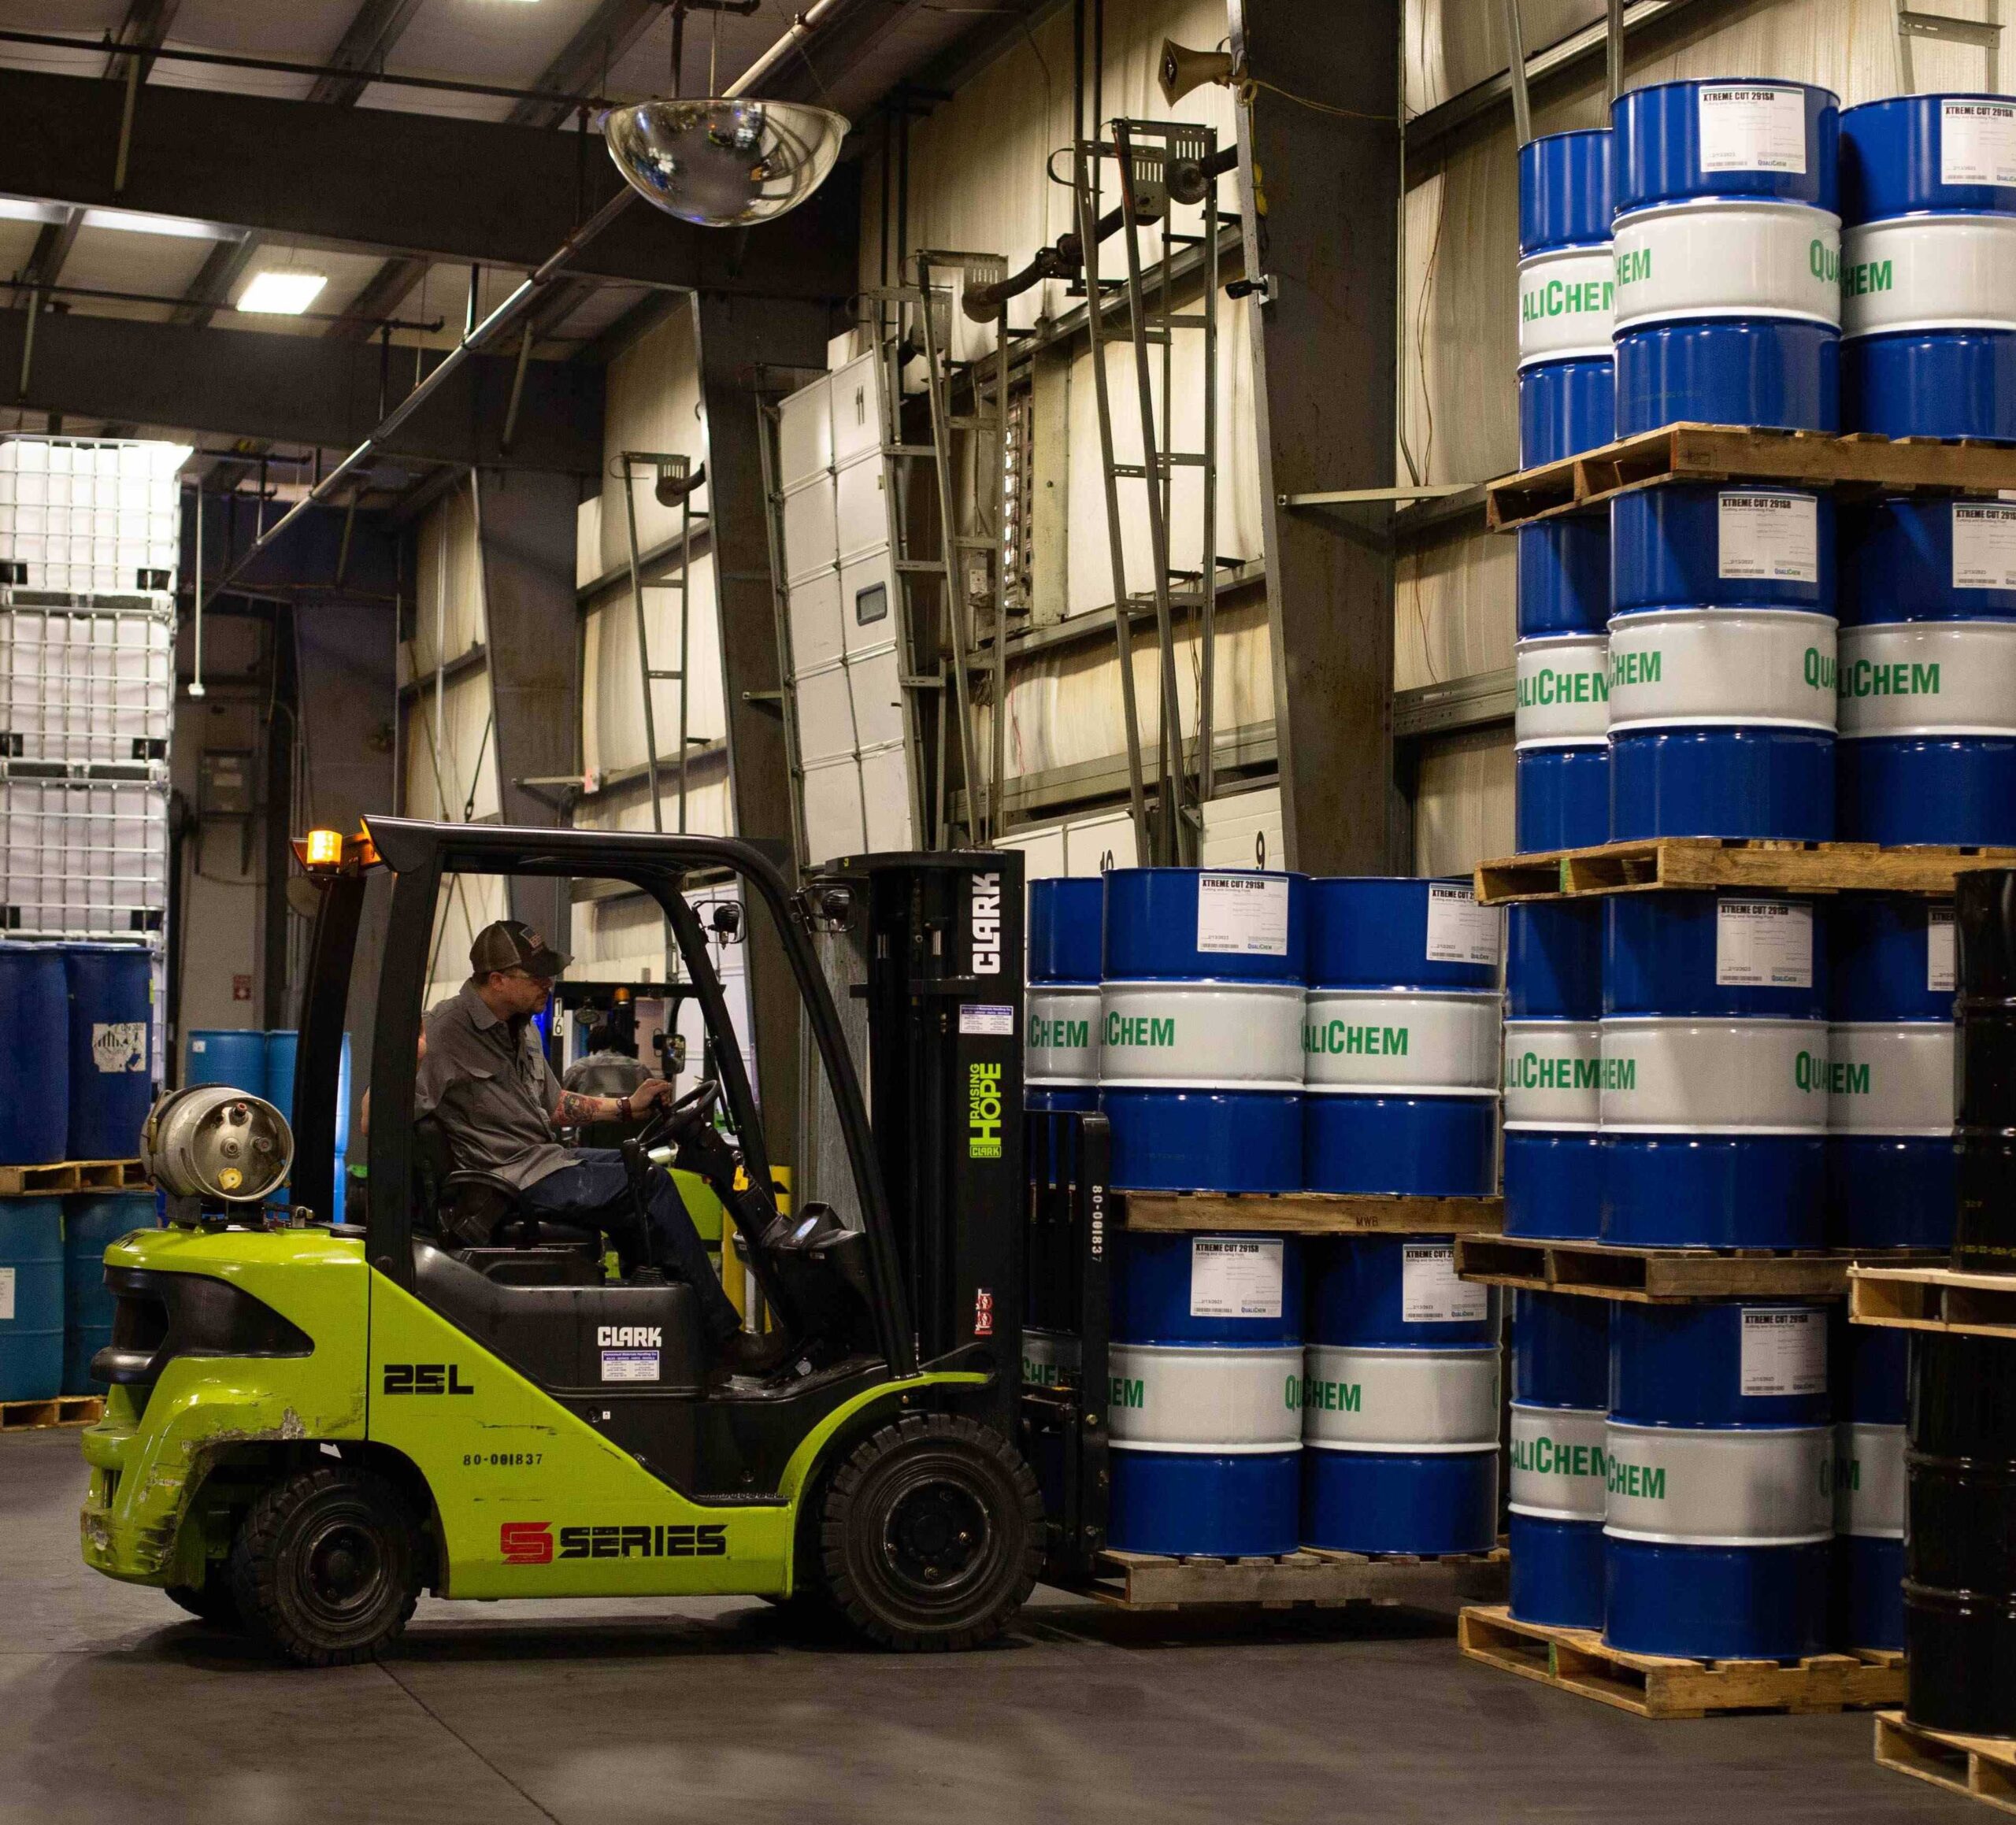 A forklift operator transporting blue chemical drums inside a warehouse with shelves stocked with various industrial containers.